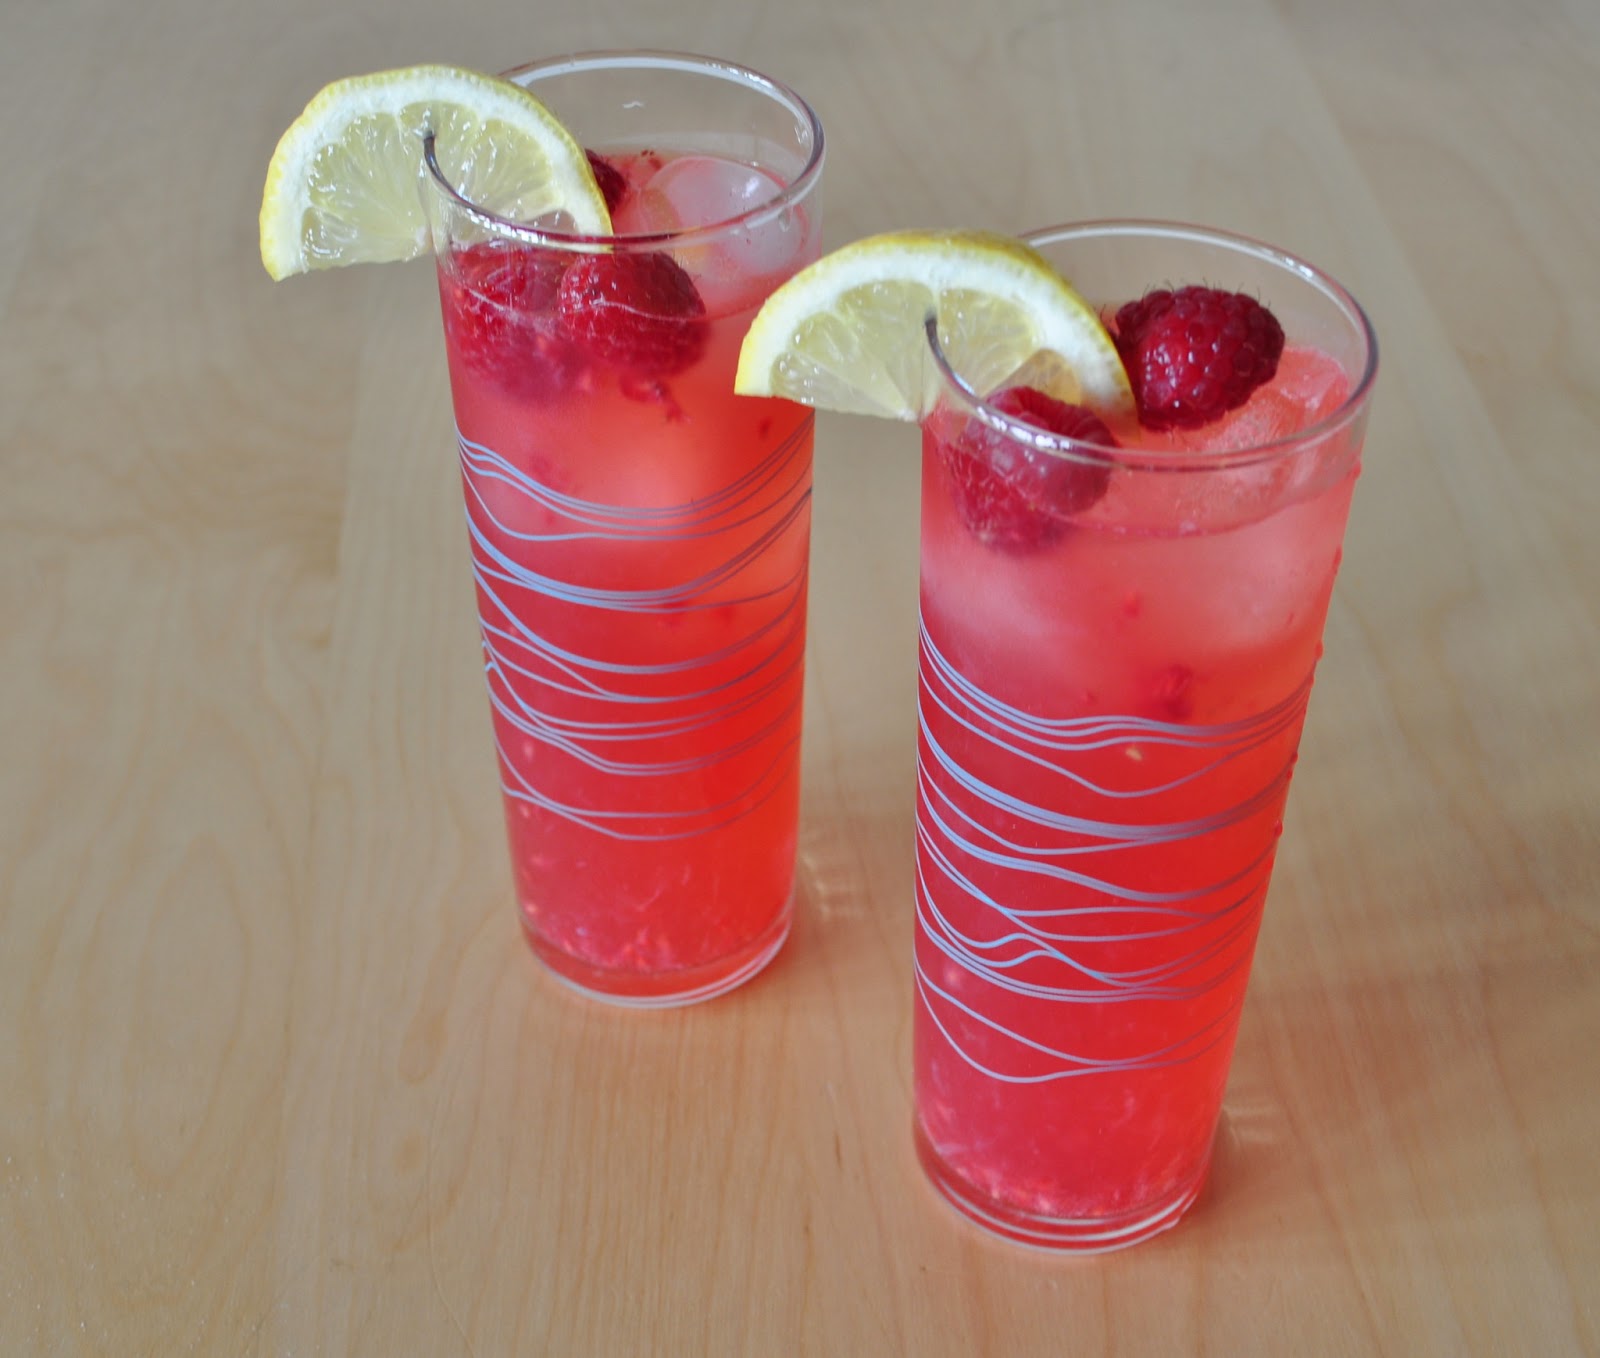 Summer Beer Punch: In that pincher: 4 coronas, 1/3 cup raspberry